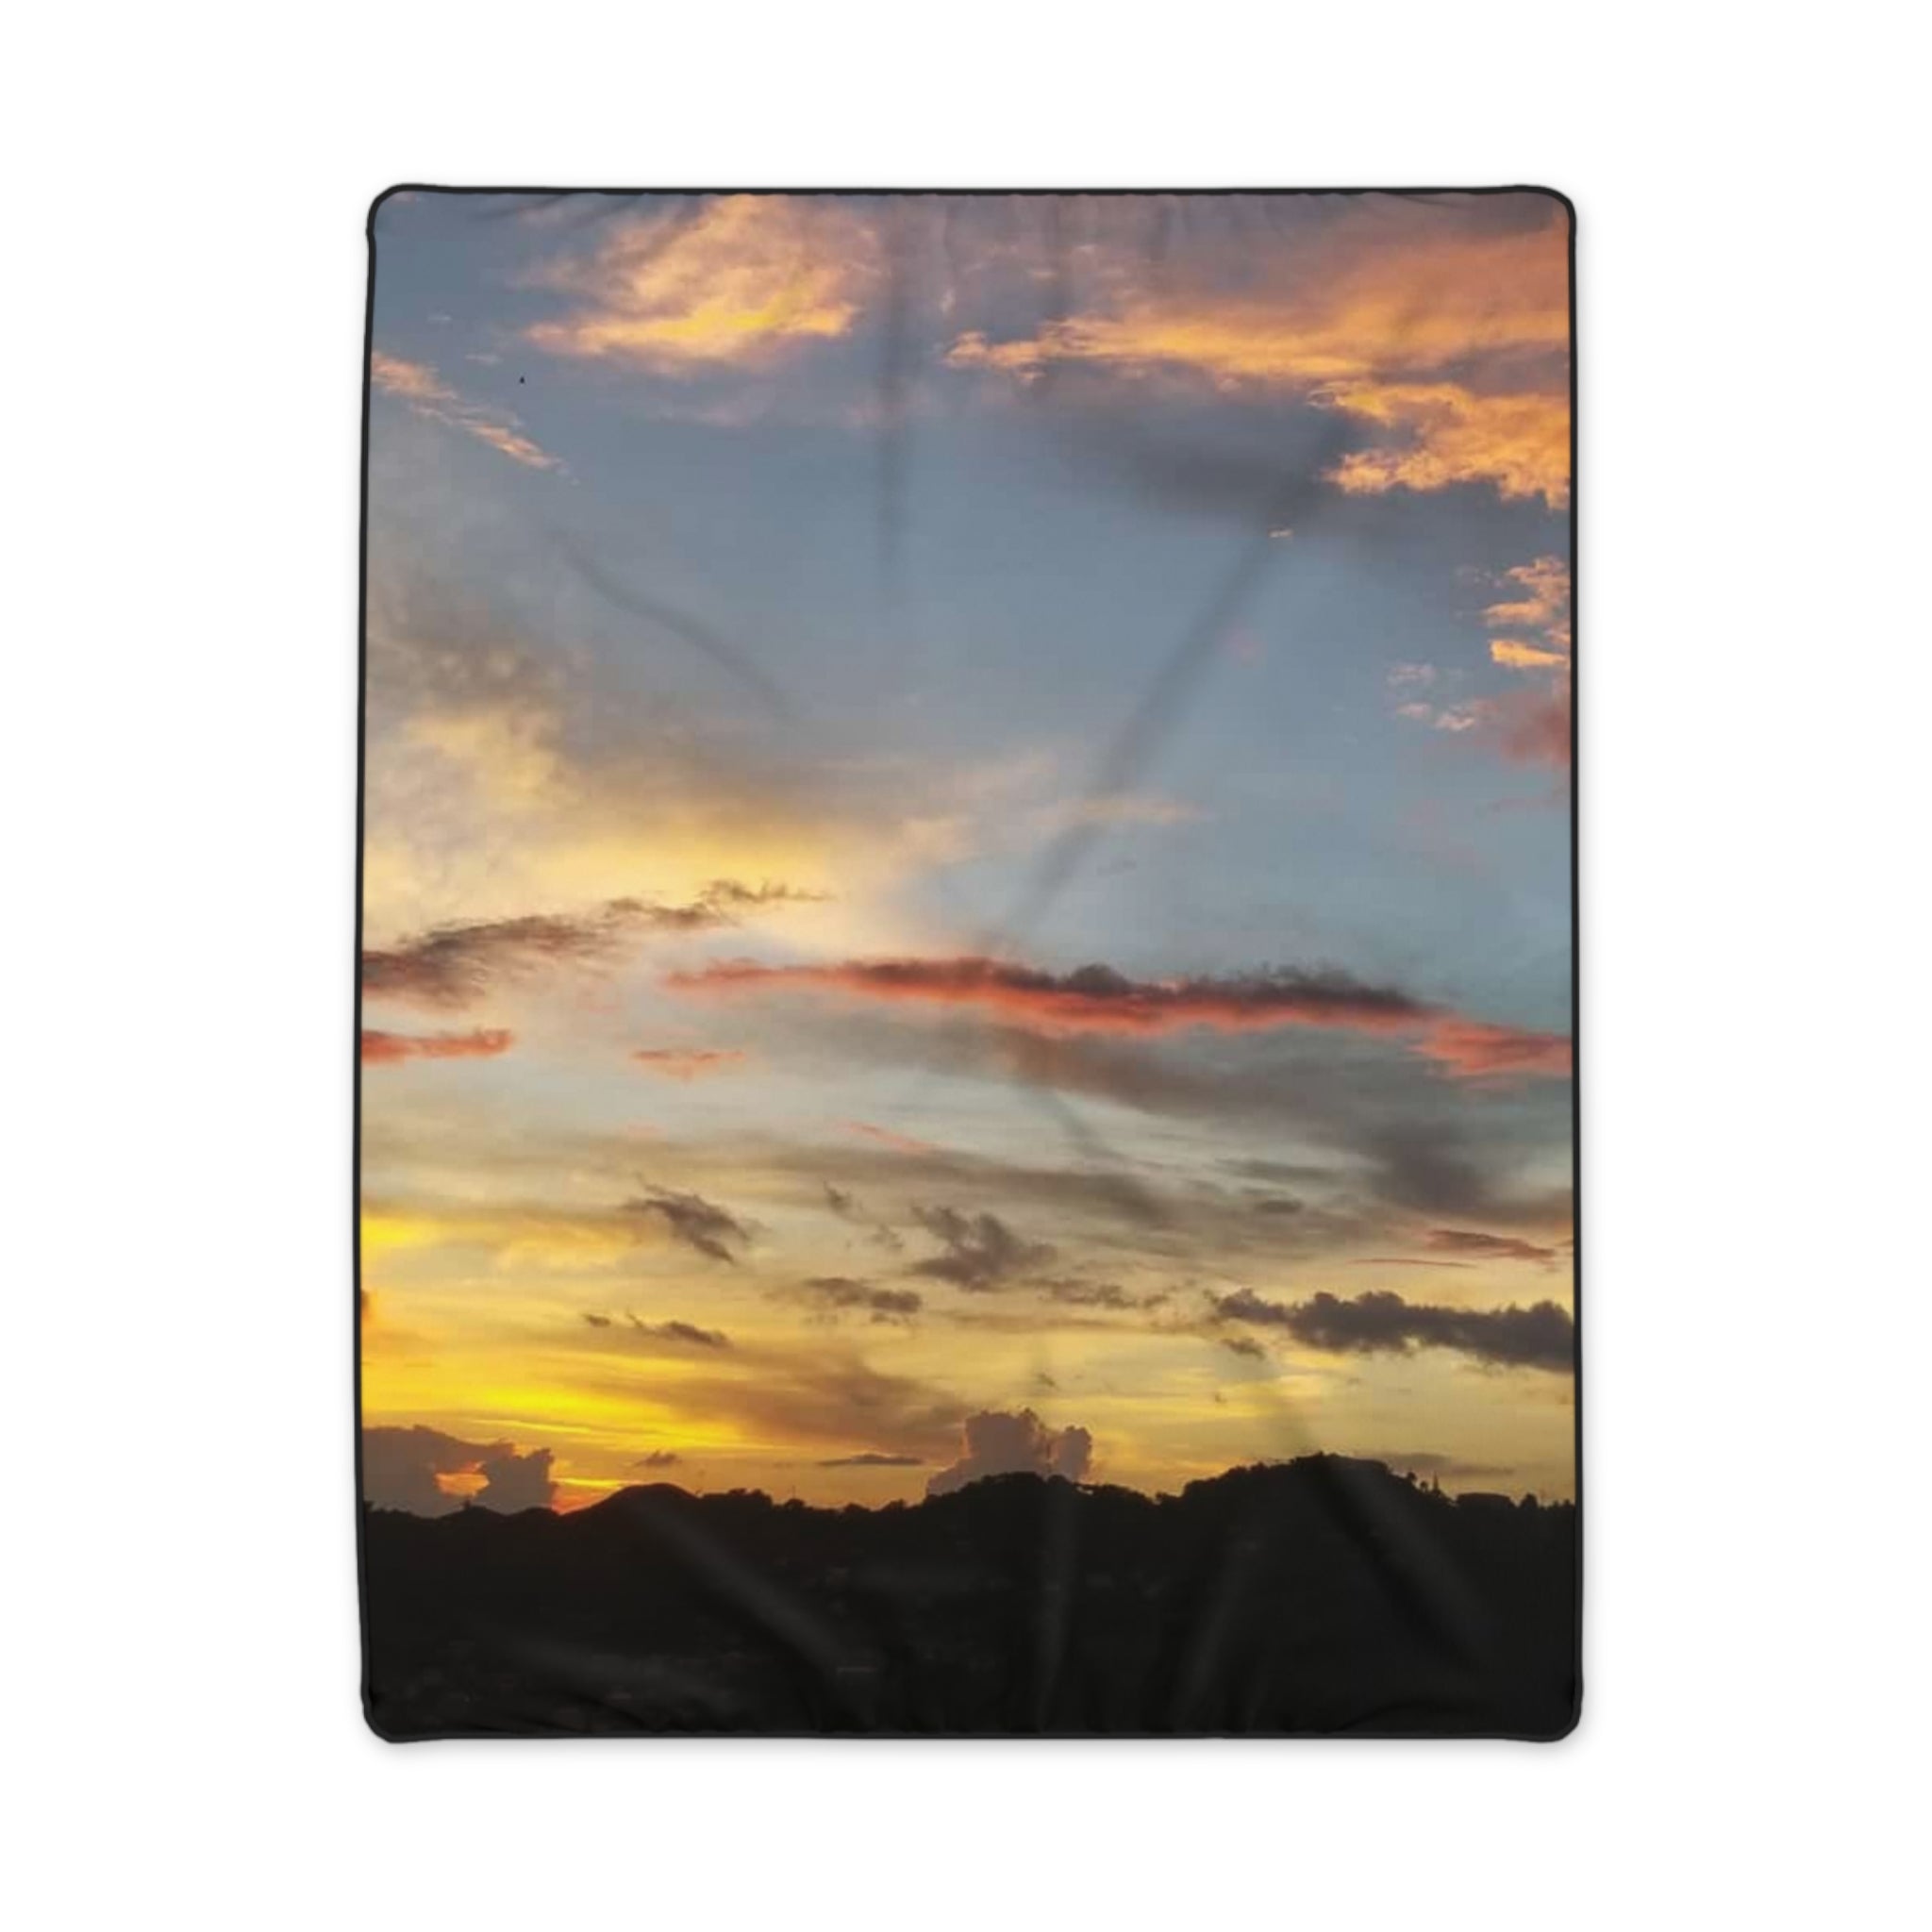 St. Vincent and the Grenadines Polyester Blanket - Kingstown Sunset